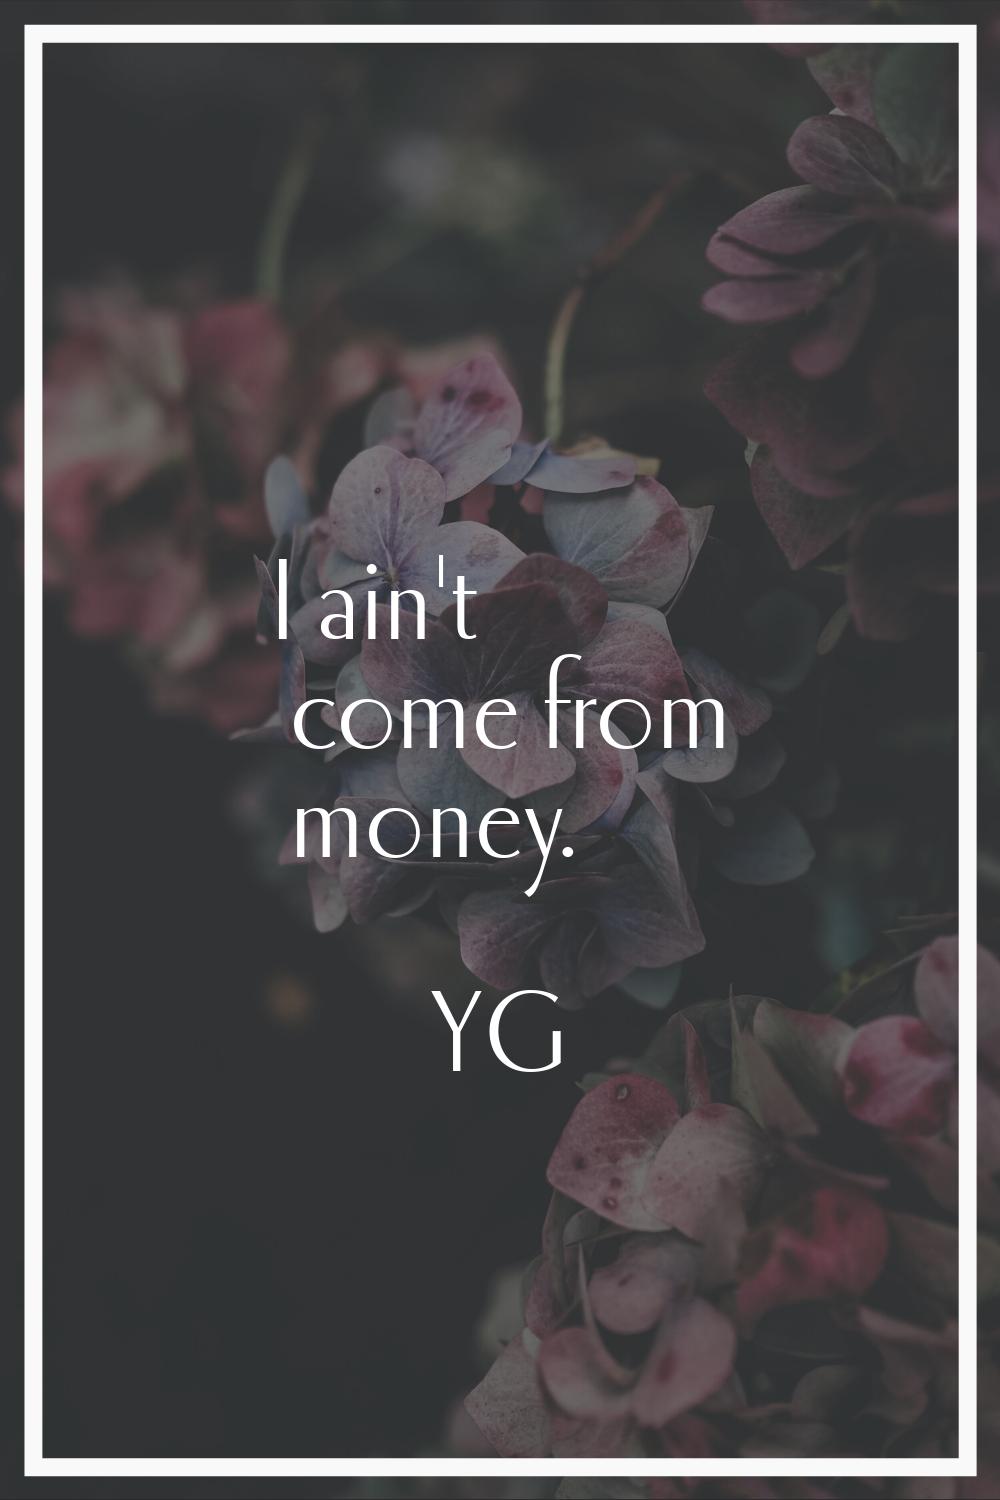 I ain't come from money.